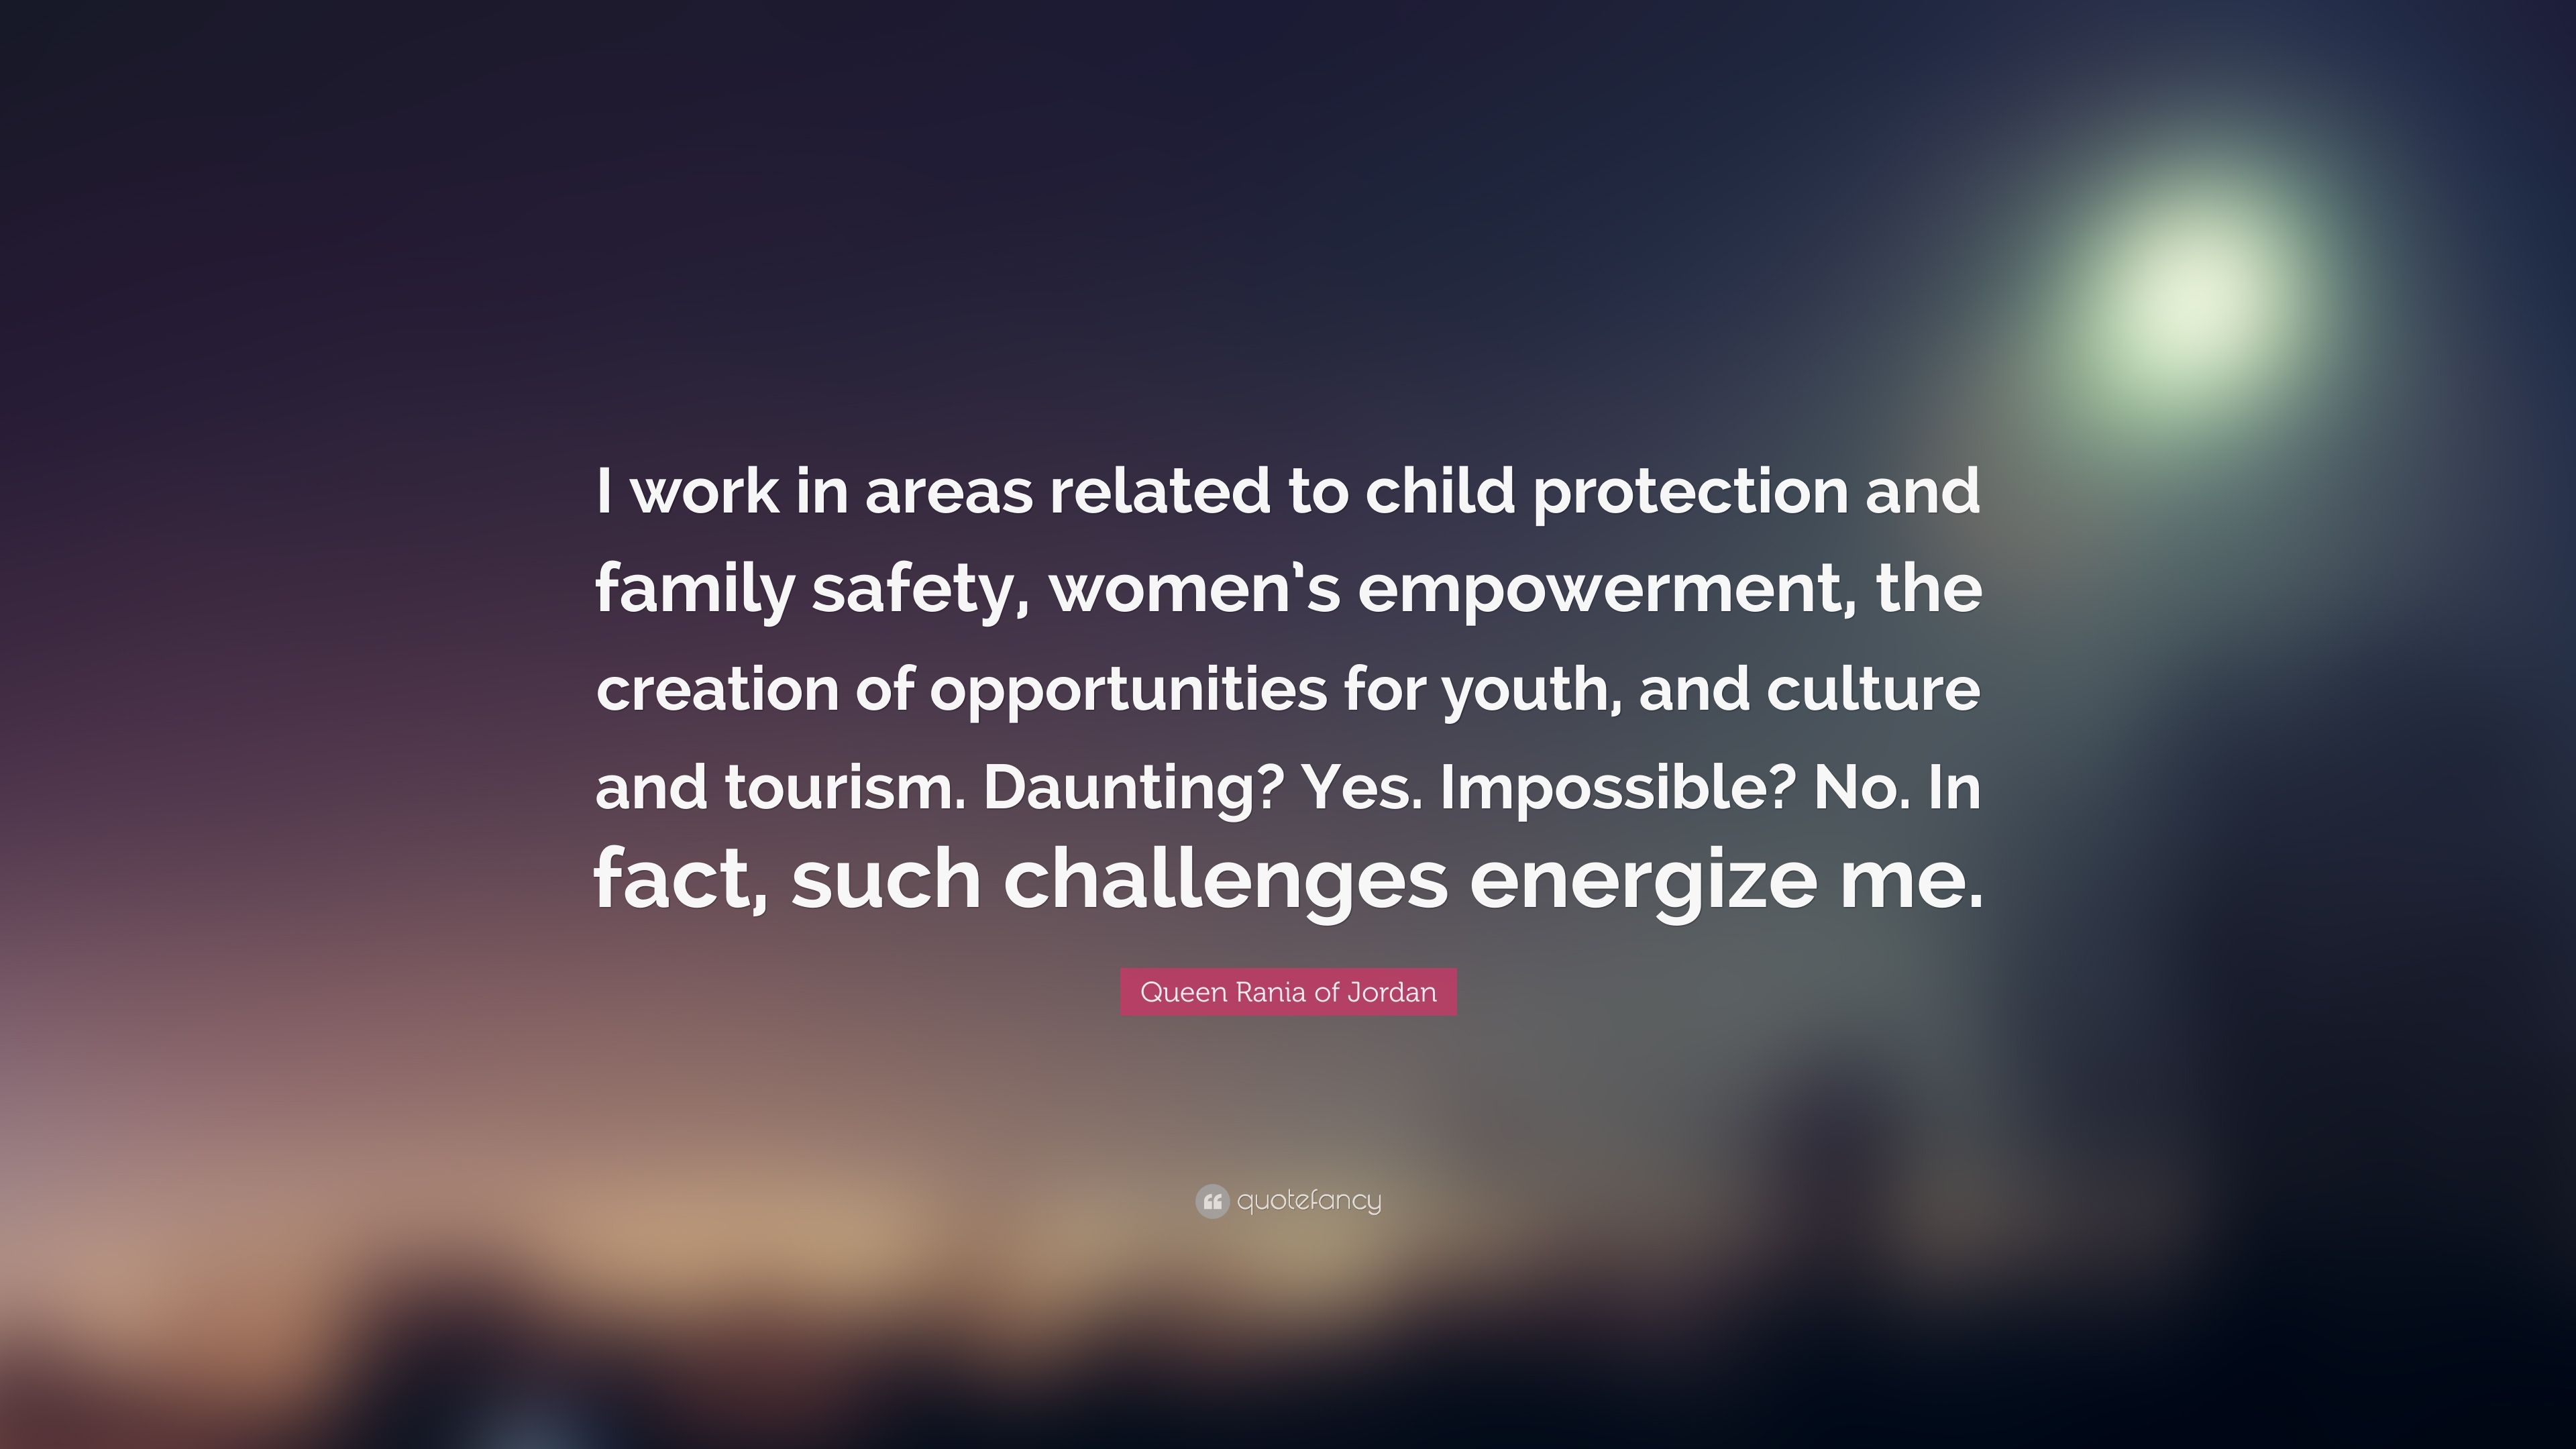 Queen Rania of Jordan Quote: “I work in areas related to child protection and family safety, women's empowerment, the creation of opportunities for yo.” (9 wallpaper)